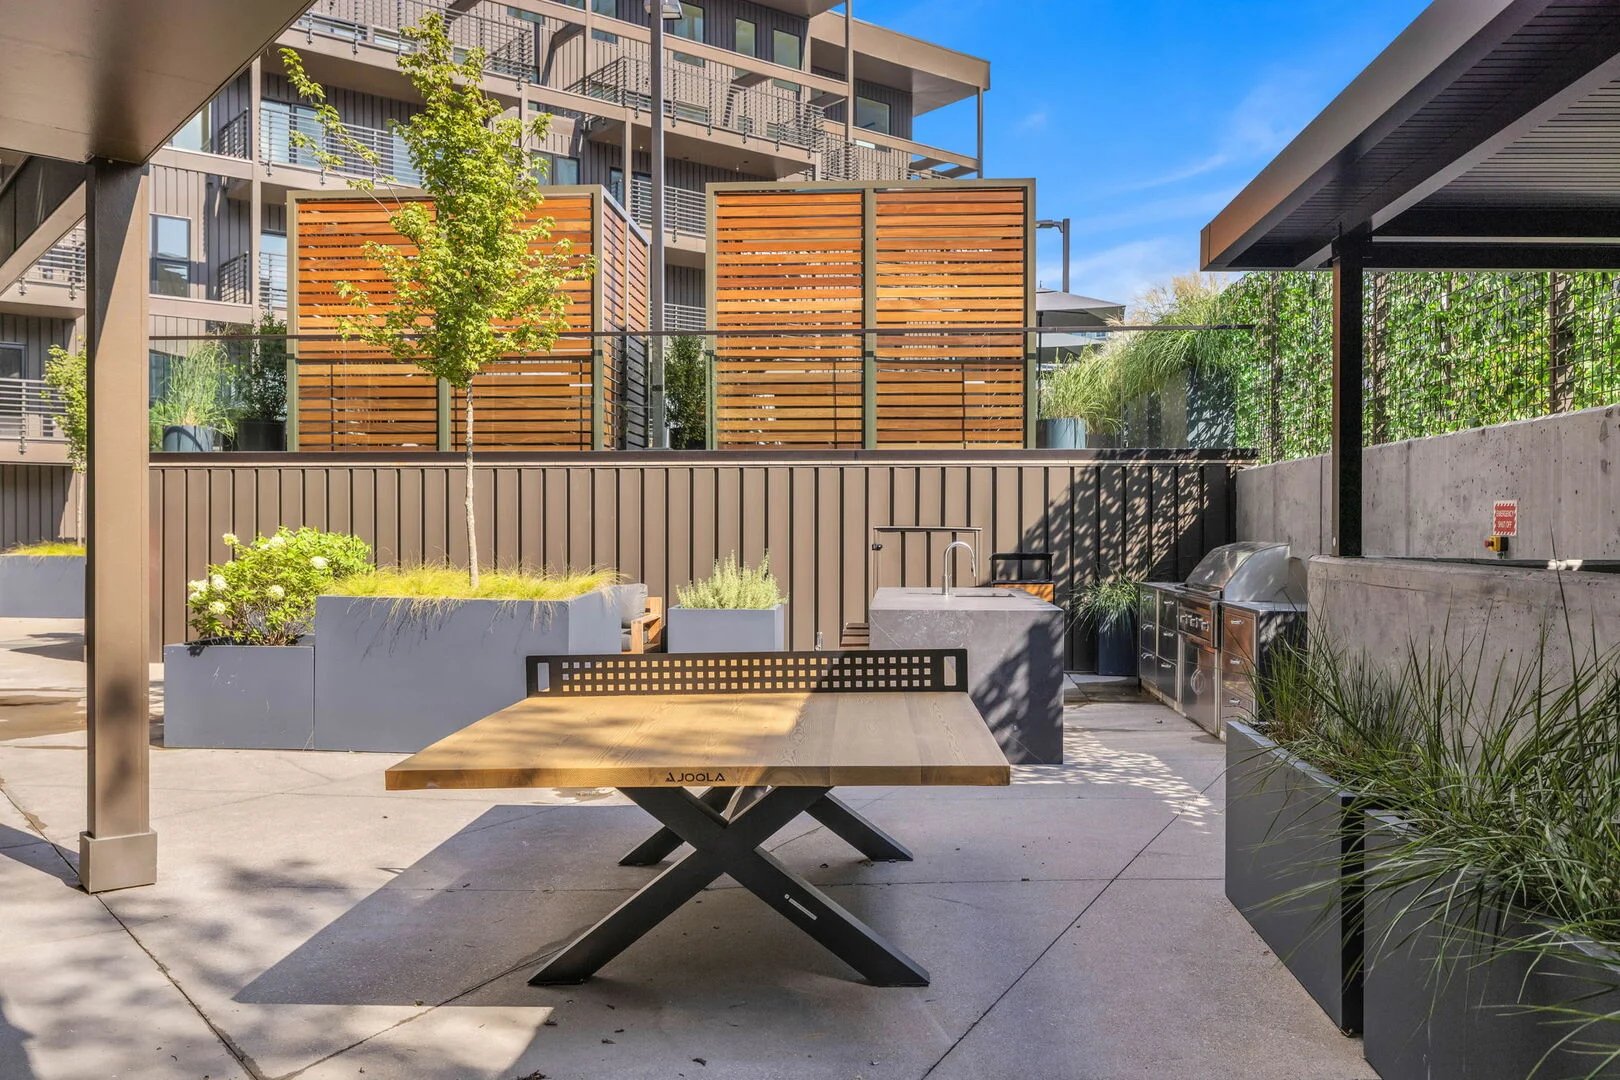 Communal Area: Outdoor furnishings for lounging with a firepit, Ping Pong, and built-in BBQ grill with an outdoor island offering bar seating.